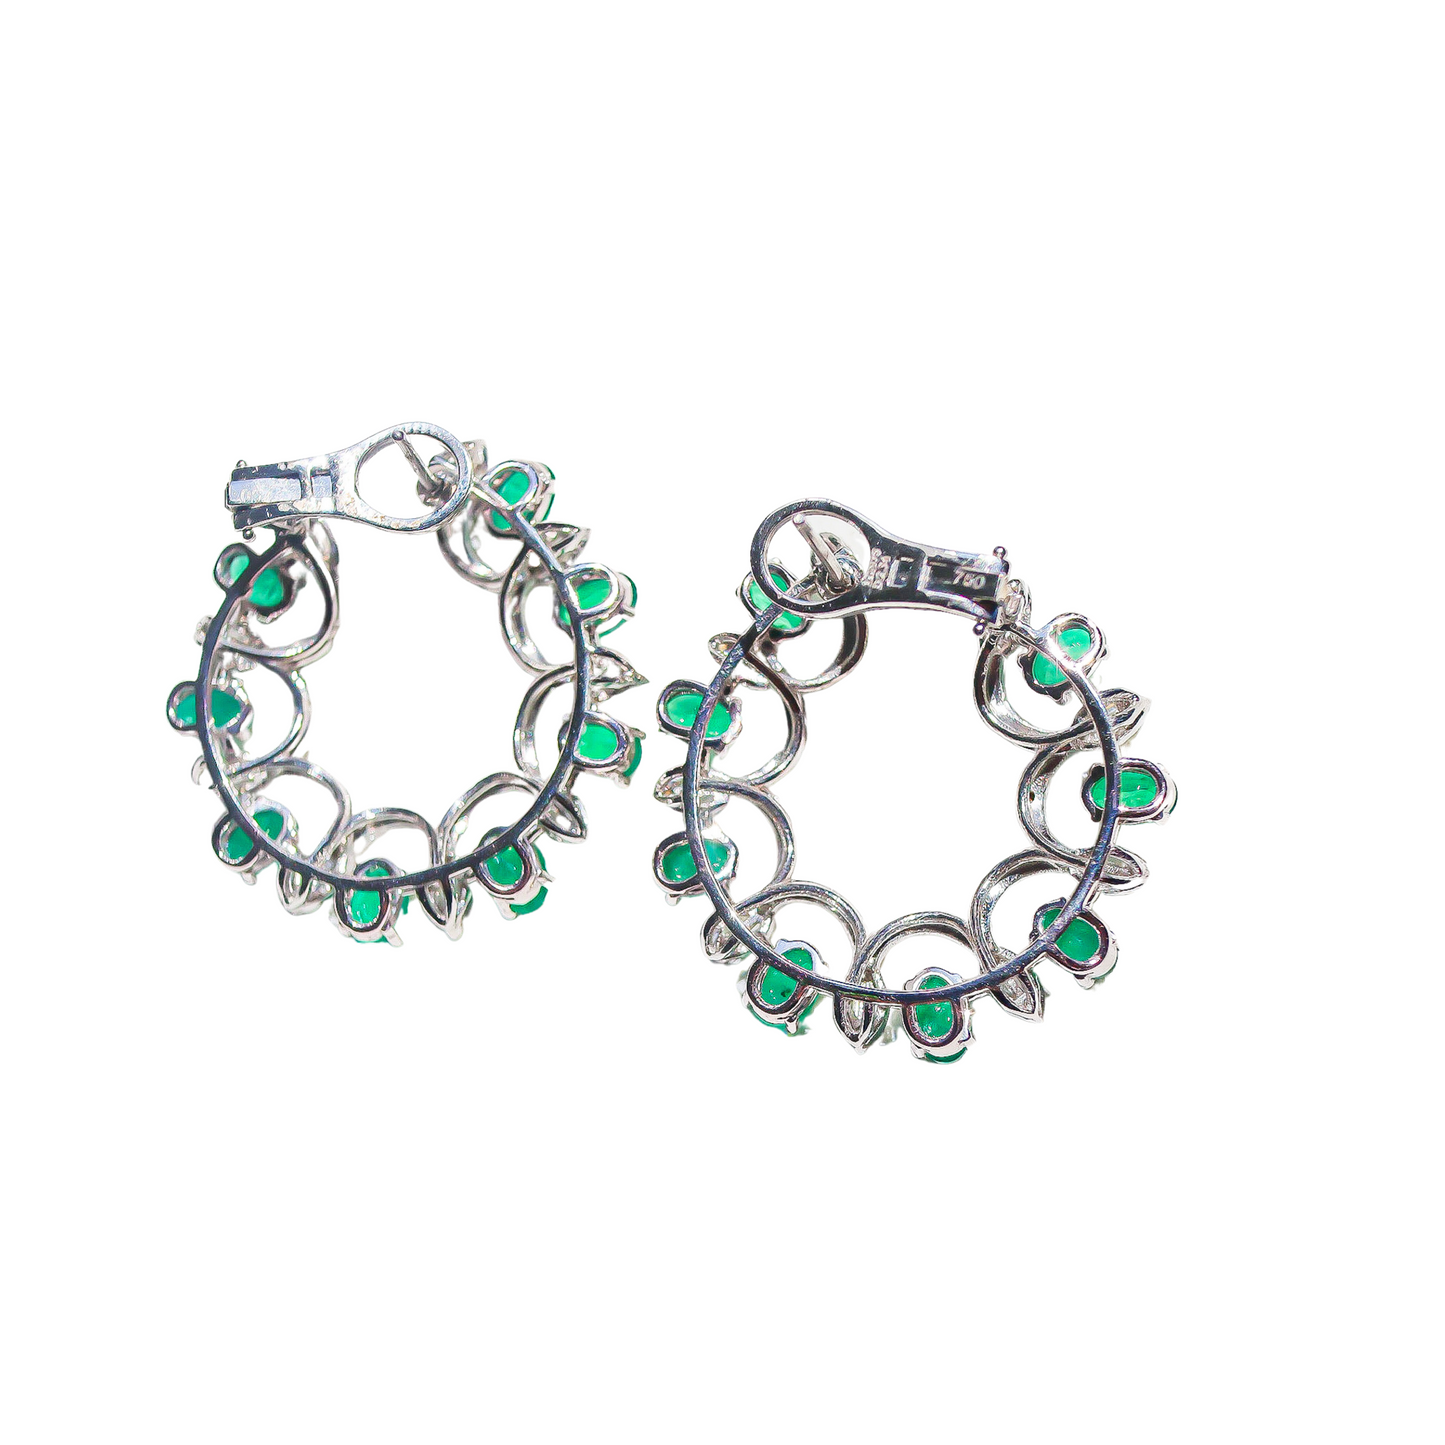 Emerald and Marquise Diamond Garland Earring